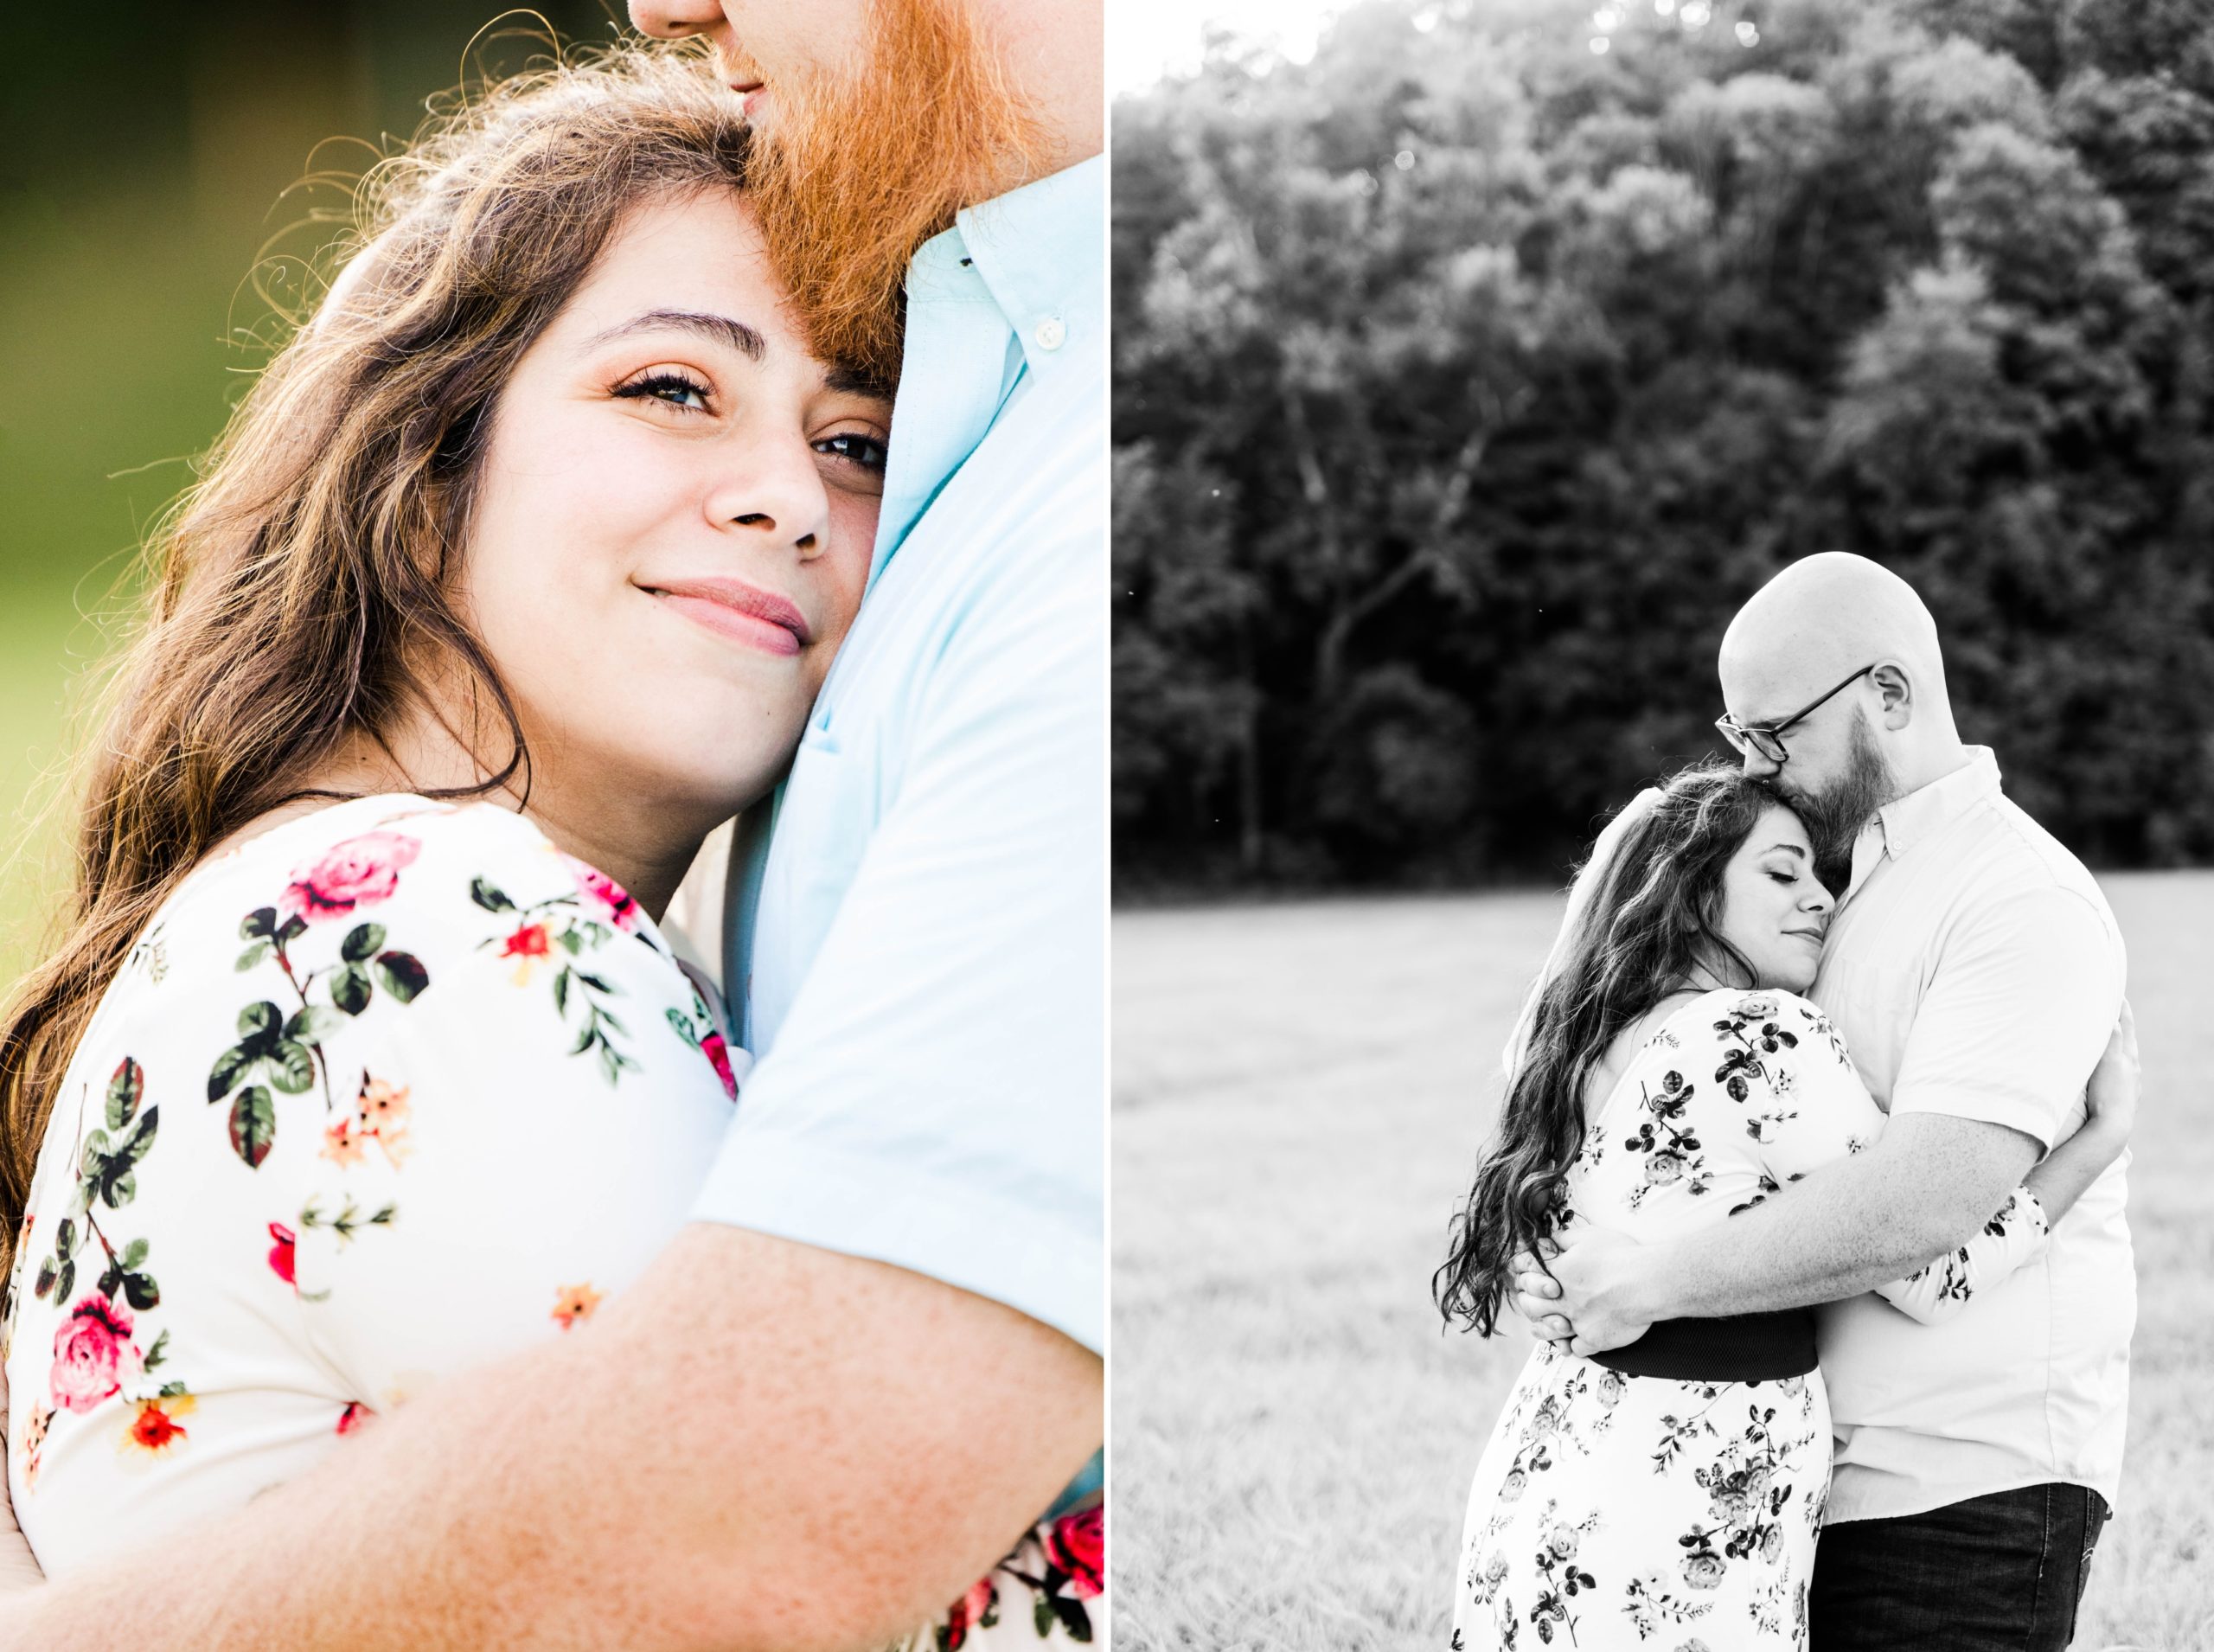 Photo collage of an engaged couple where the bride to be is leaning on the chest of the groom with one photos a close up of the bride and the second is black and white of the groom kissing the bride to be's forehead